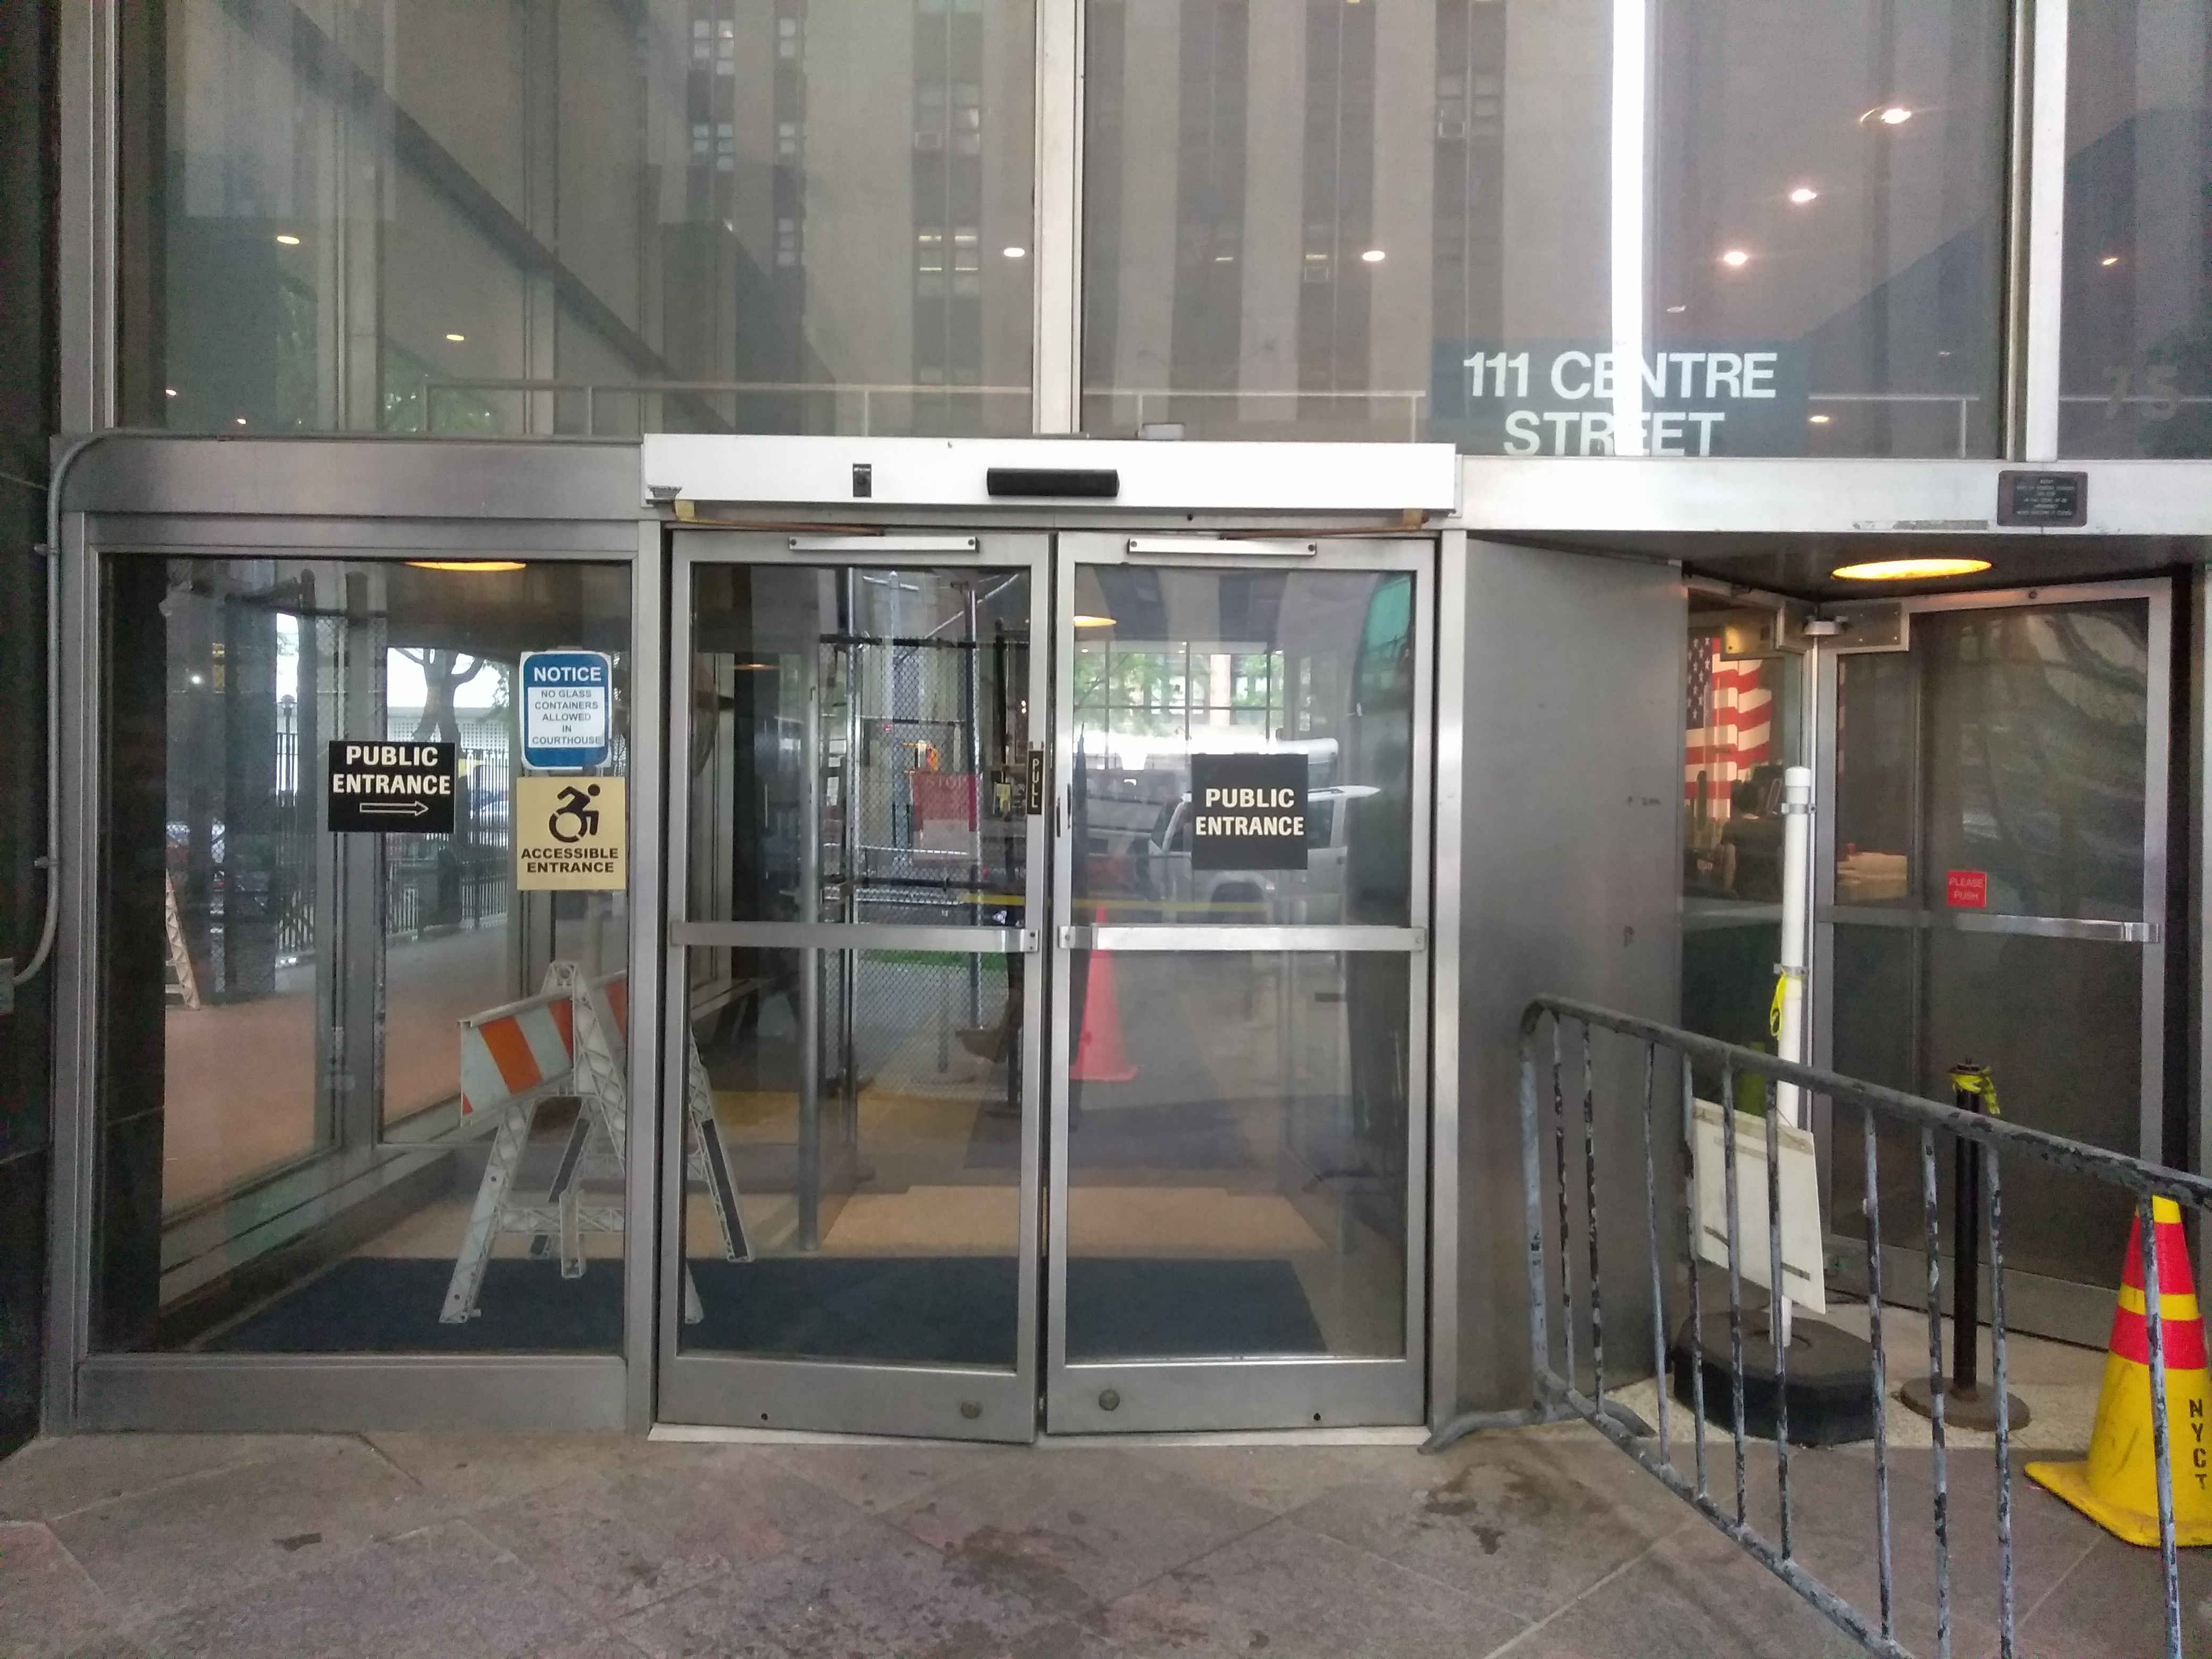 A double door entrance labeled Public Entrance is located on the street level.  To the left of the double doors is ADA signage.  There is a barricade to the right of the double door entrance.